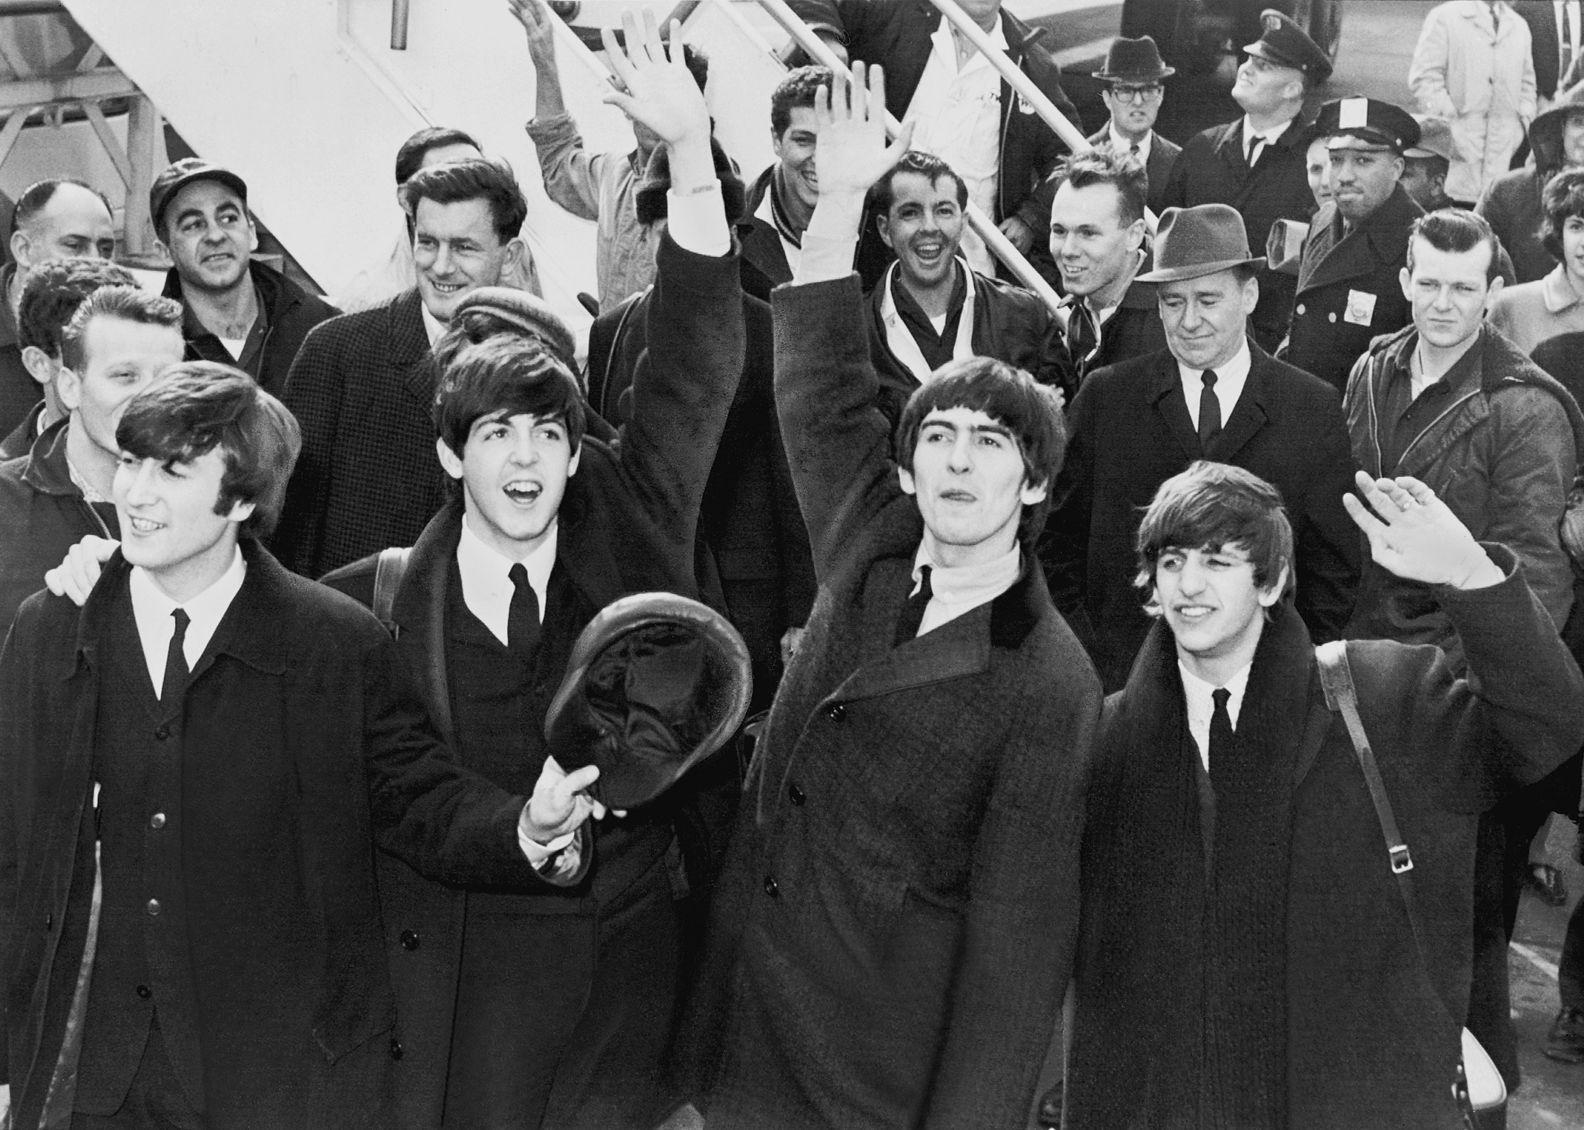 The Beatles waving in a crowd.